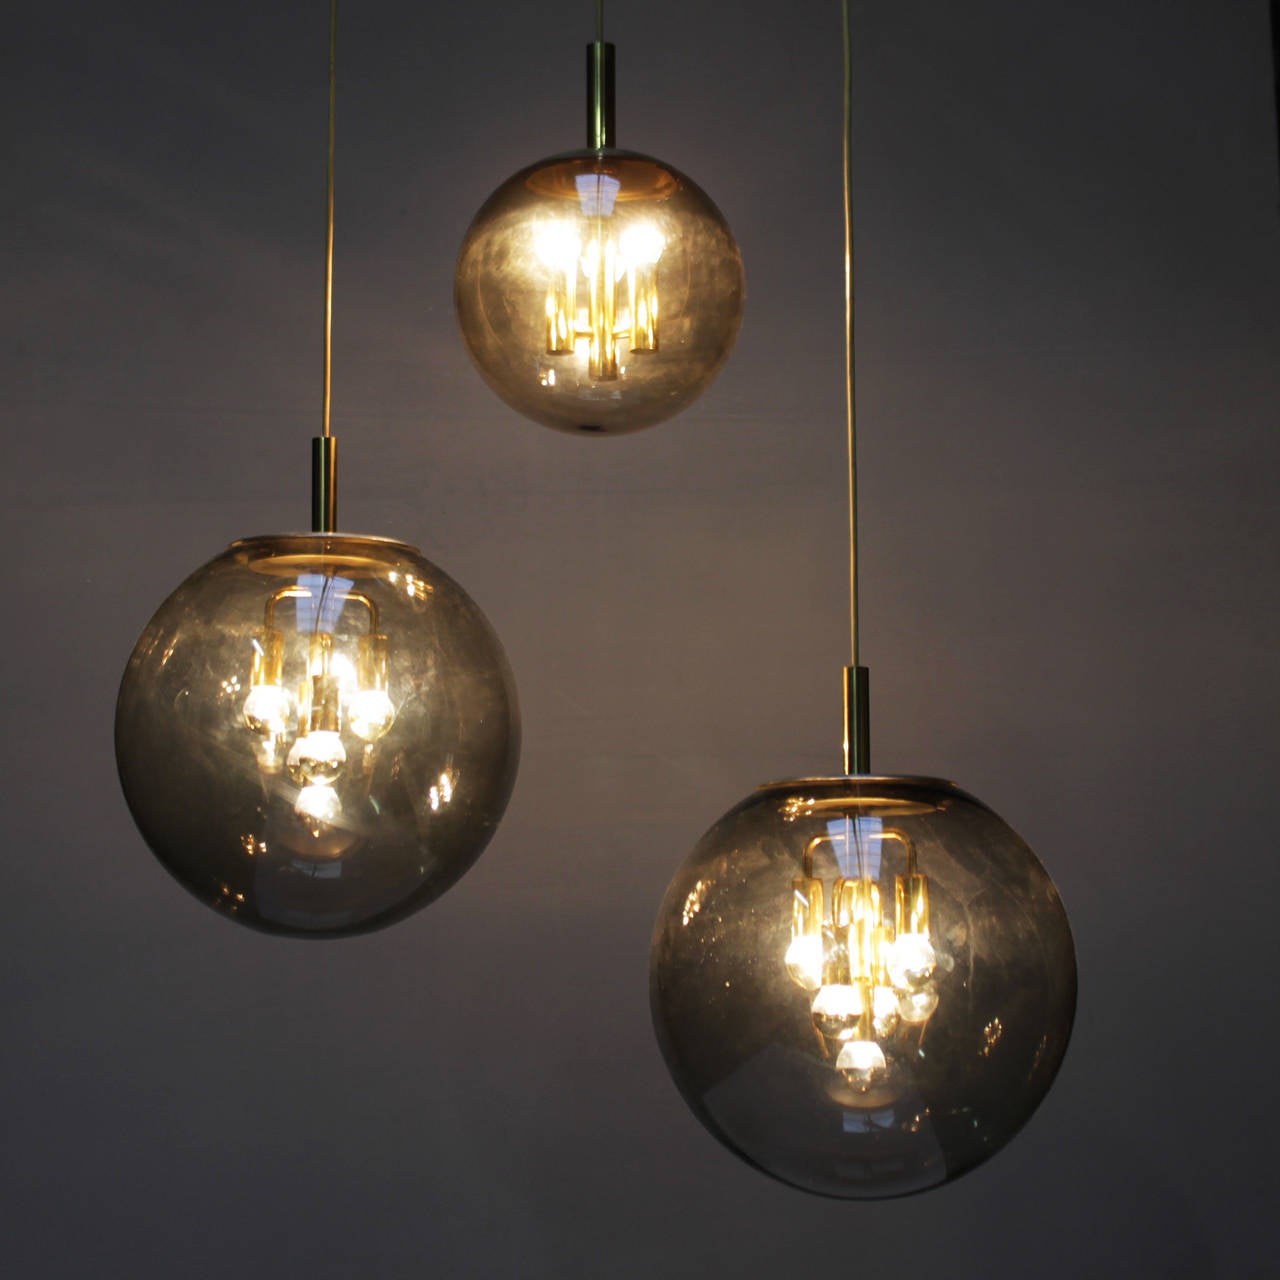 Large globe lights by Doria Germany. Two sizes: diameter 15.7 in. (40 cm) and diameter 11.8 inches (30 cm). We can offer you three globes of 11.8 inches (with three bulbs each) and two globes of 15.7 inches with five bulbs.
Price per piece: for a